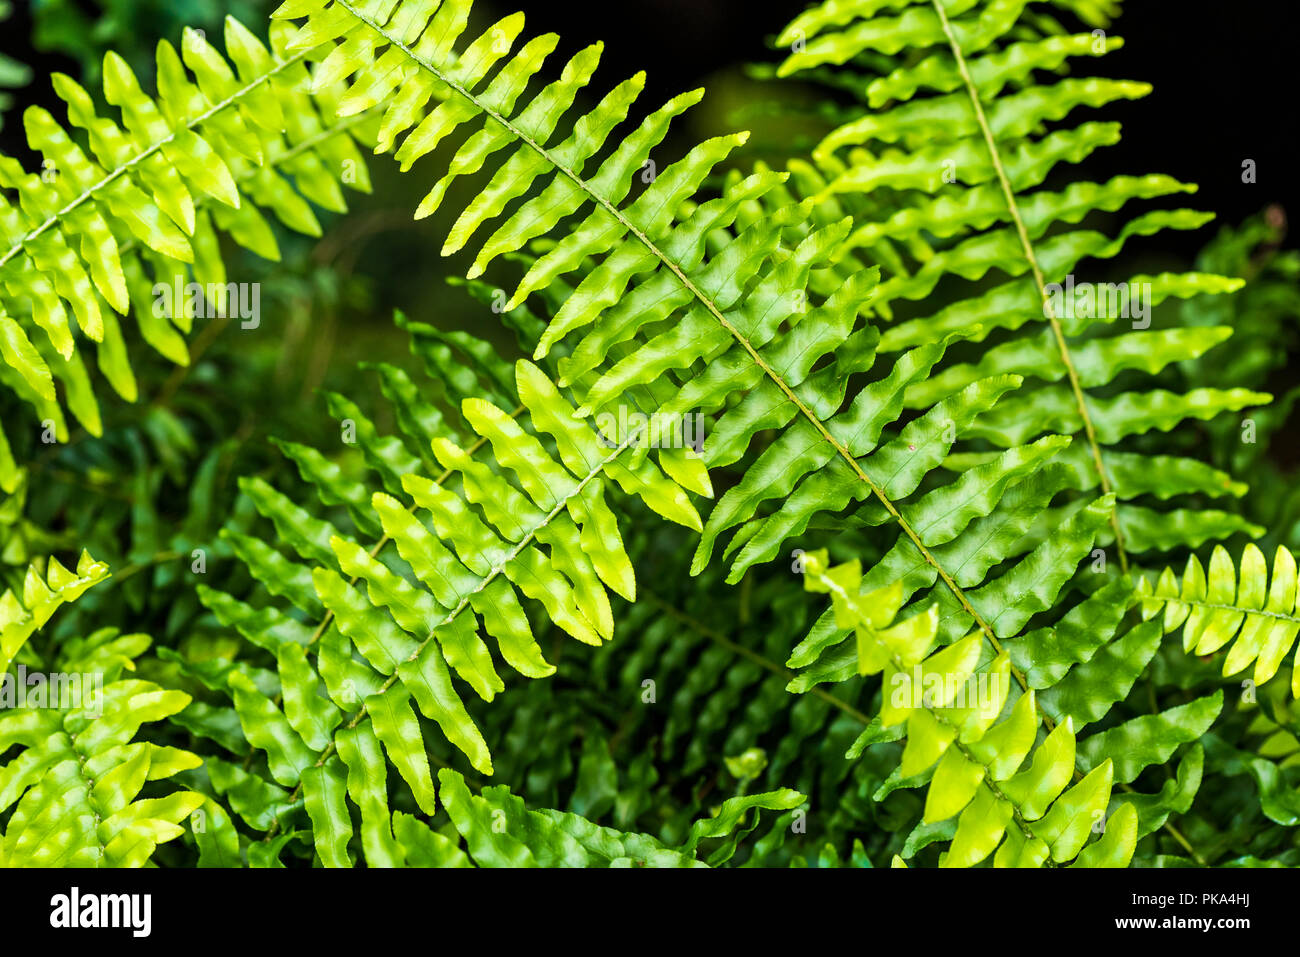 Green ferns create an abstract pattern. Stock Photo